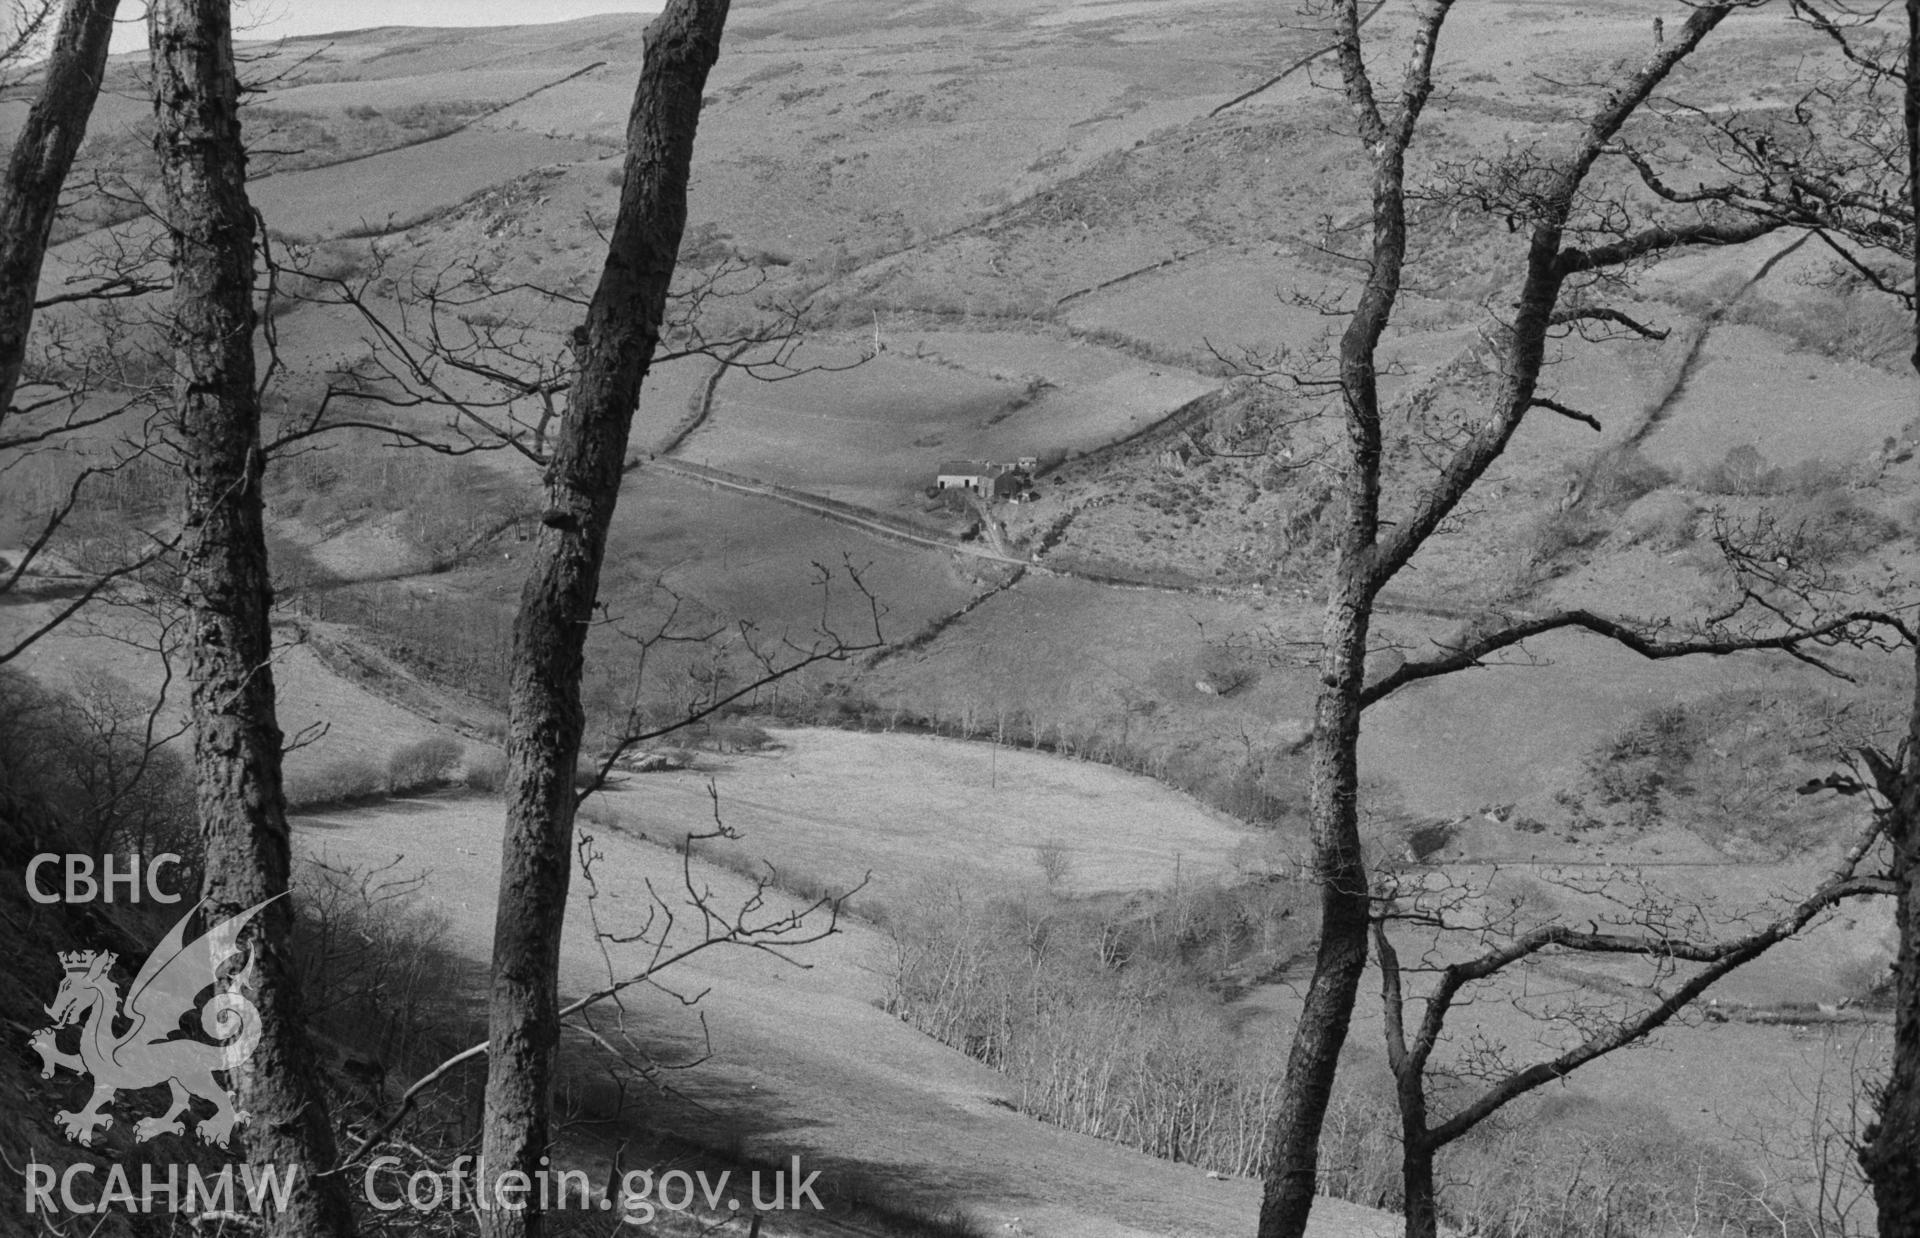 Digital copy of black & white negative showing view 350m north north west of Pendinas (where Nant-y-Ffr?d enters Coed-Pen-y-Bontbren-Uchaf - SN67538805) across Leri valley to Cerrig-Mawr Farm. Photograph by Arthur Chater, April 1963, looking north west.